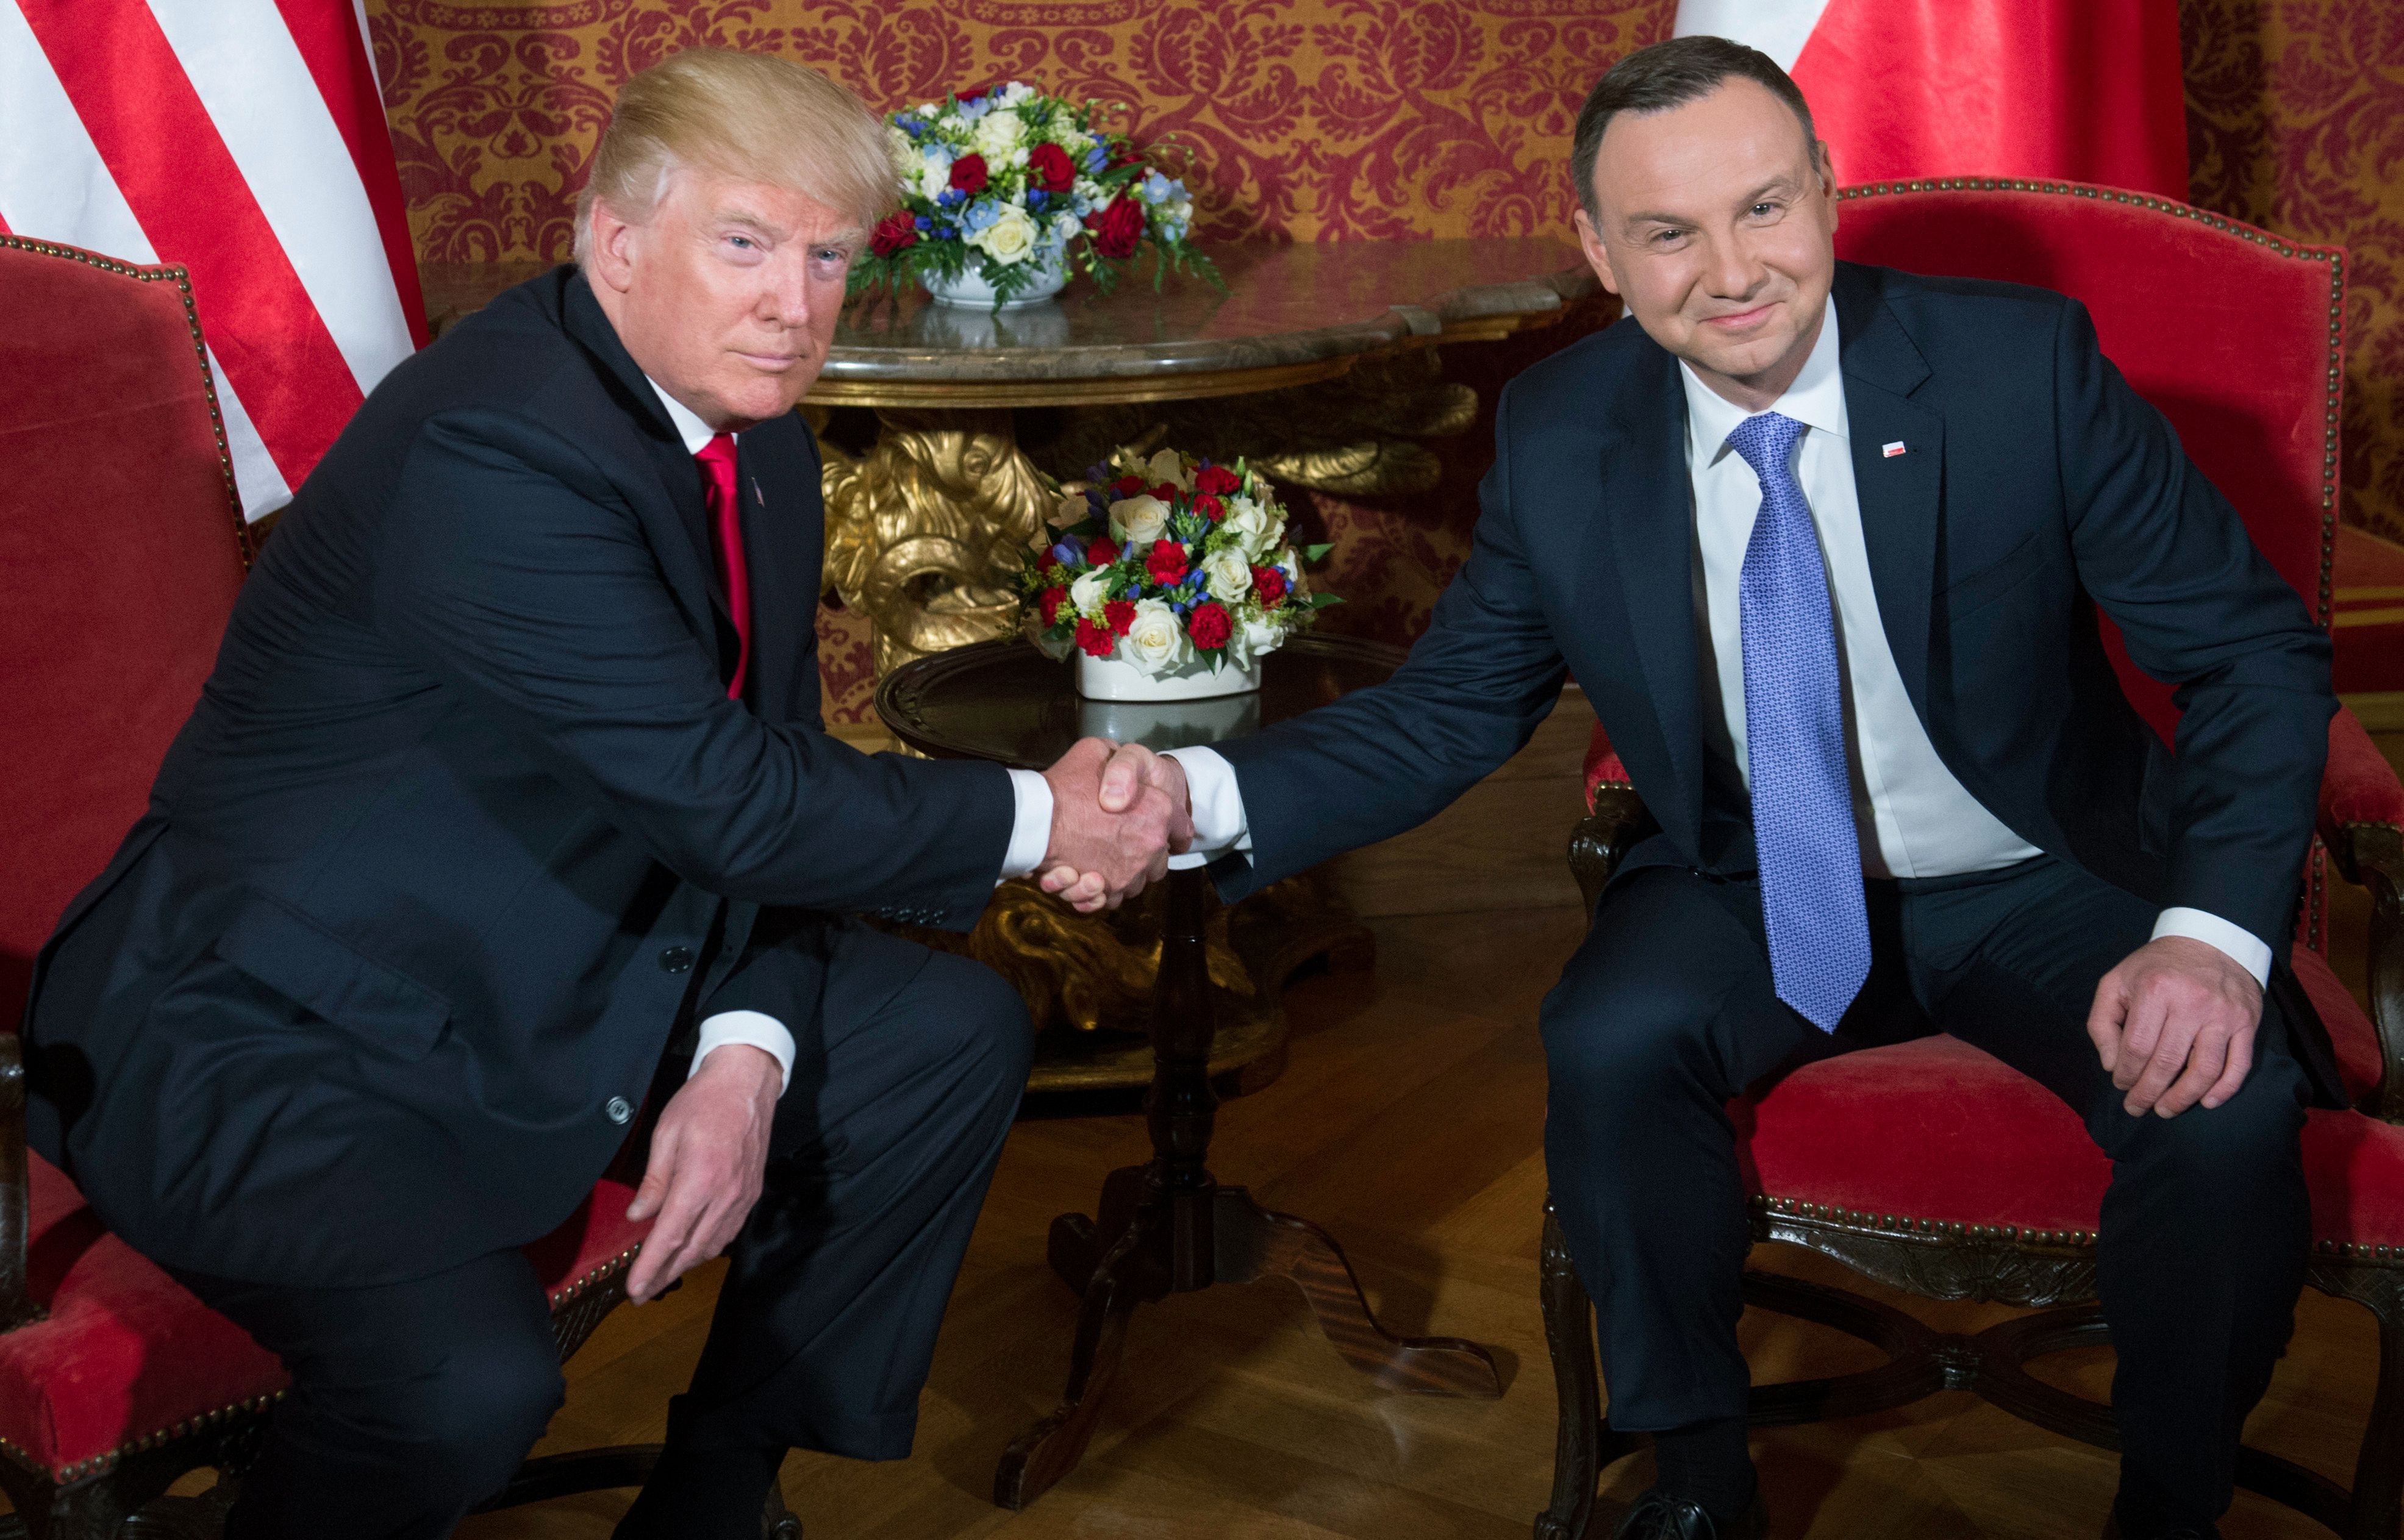 Polish President Andrzej Duda (R) and US President Donald Trump shake hands prior to a meeting at the Royal Castle in Warsaw, Poland, July 6, 2017. (SAUL LOEB—AFP/Getty Images)